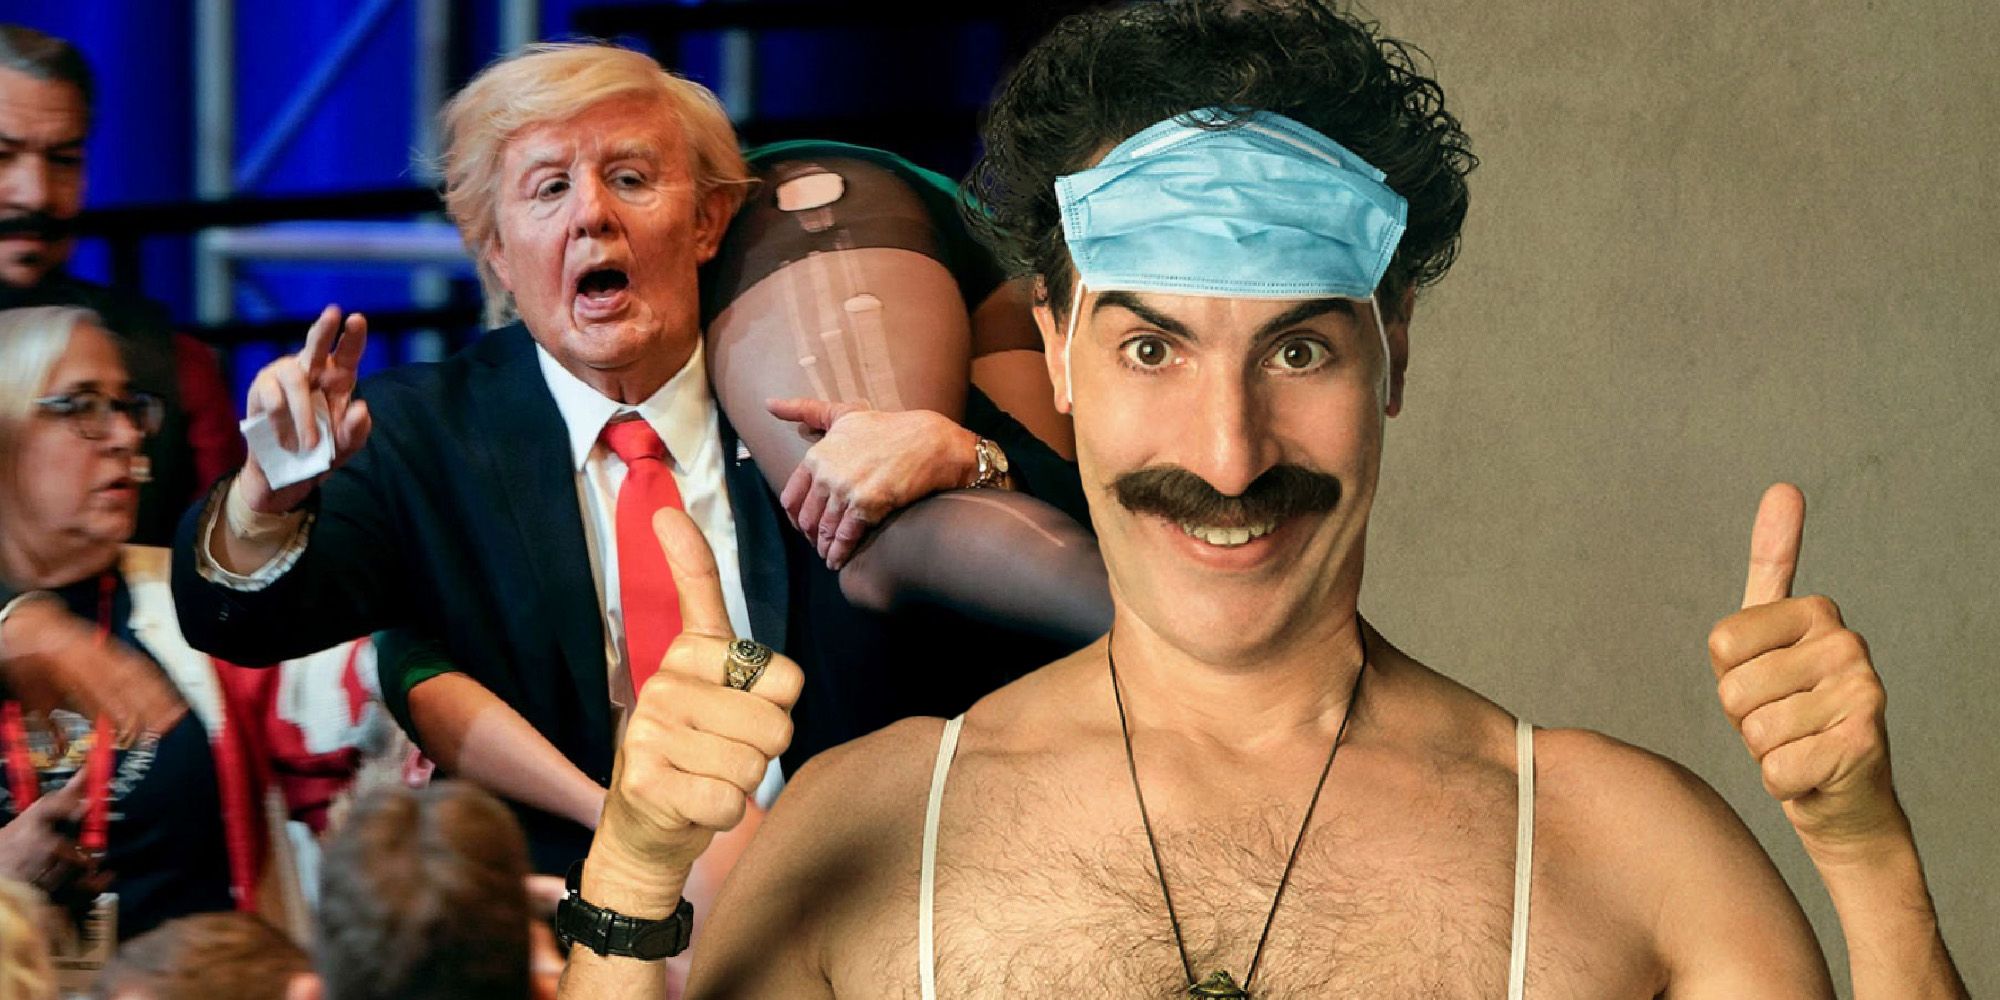 Borat 2: How Sacha Baron Cohen Pulled Off The Mike Pence CPAC Stunt